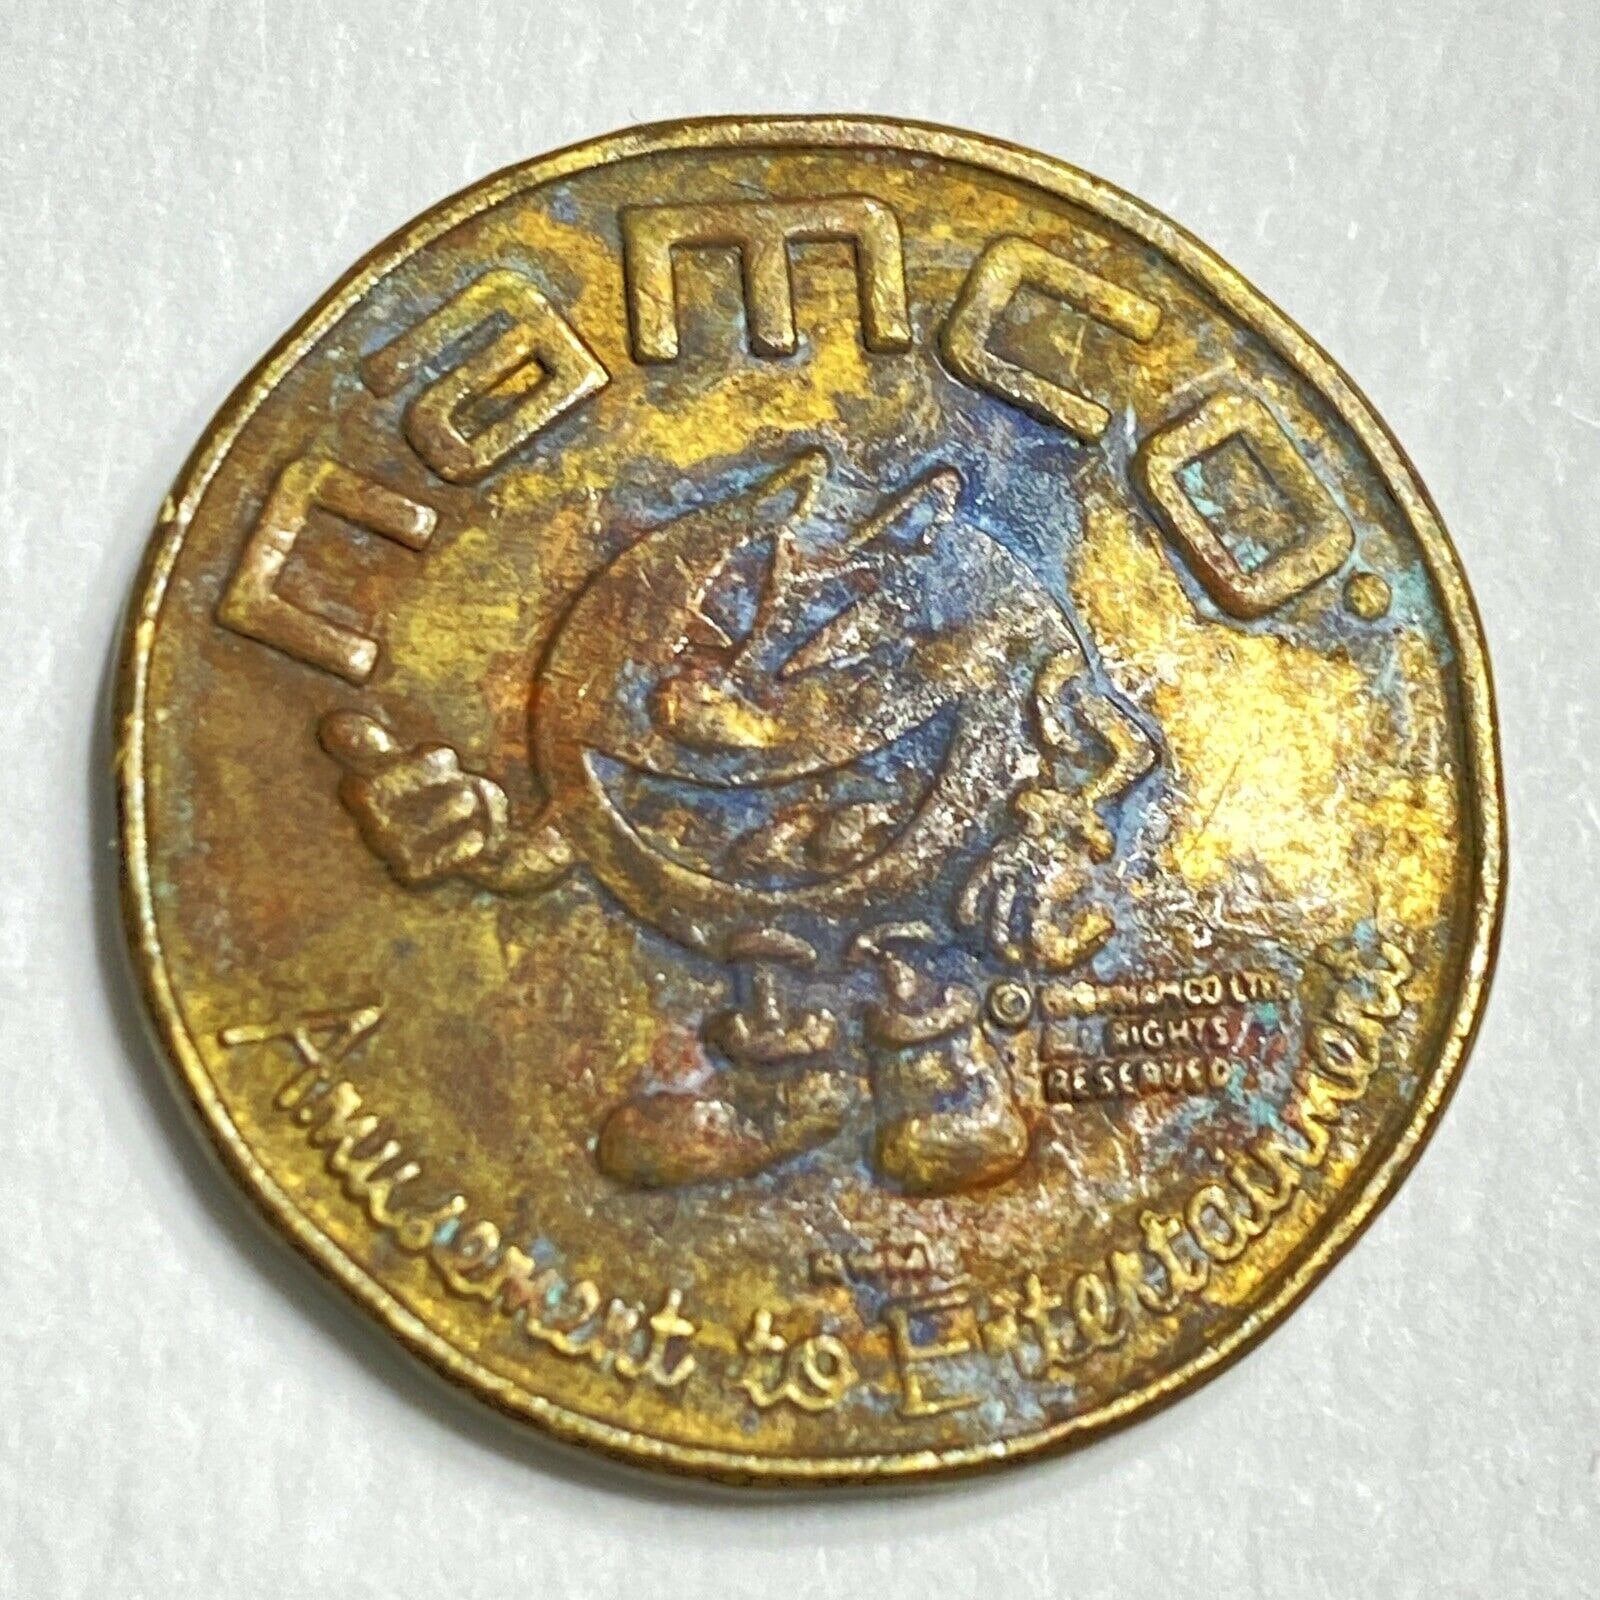 How much is a namco coin worth? - Answers